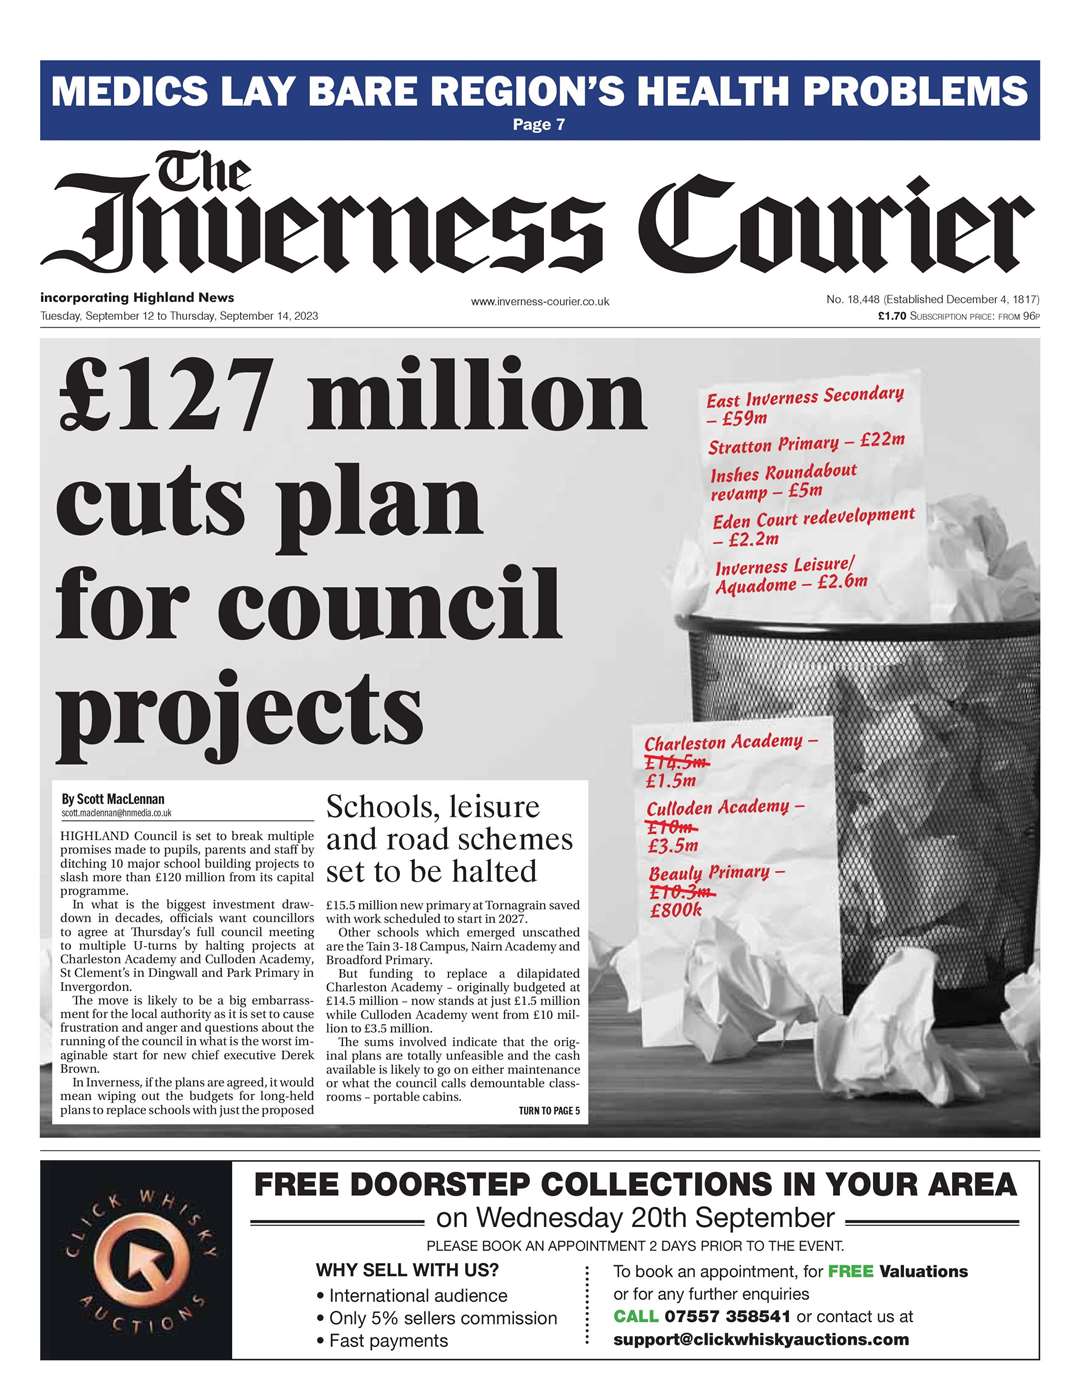 The Inverness Courier, September 12, front page.